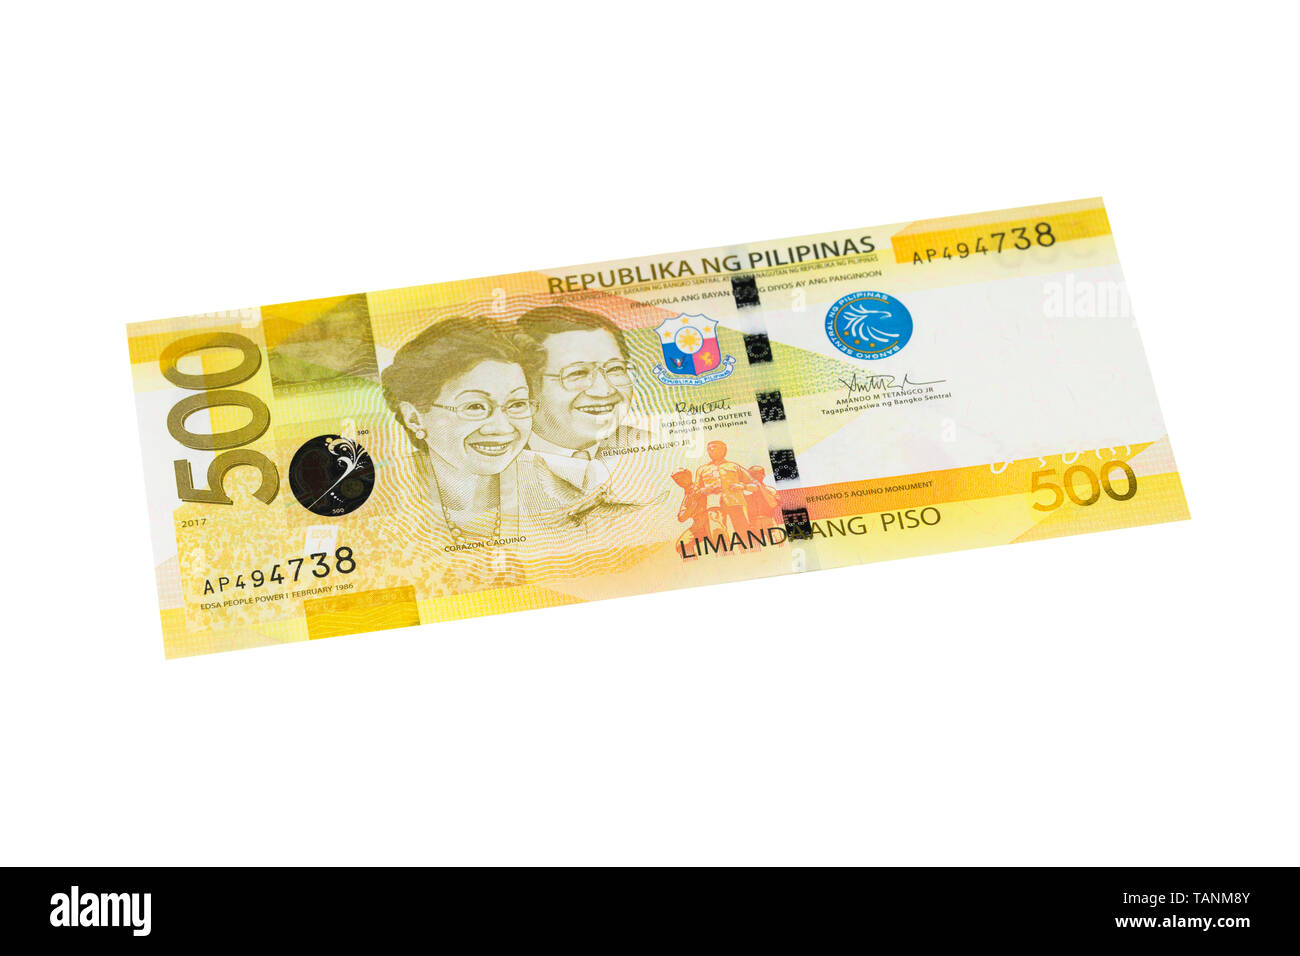 Philippine five hundred peso banknote on a white background Stock Photo